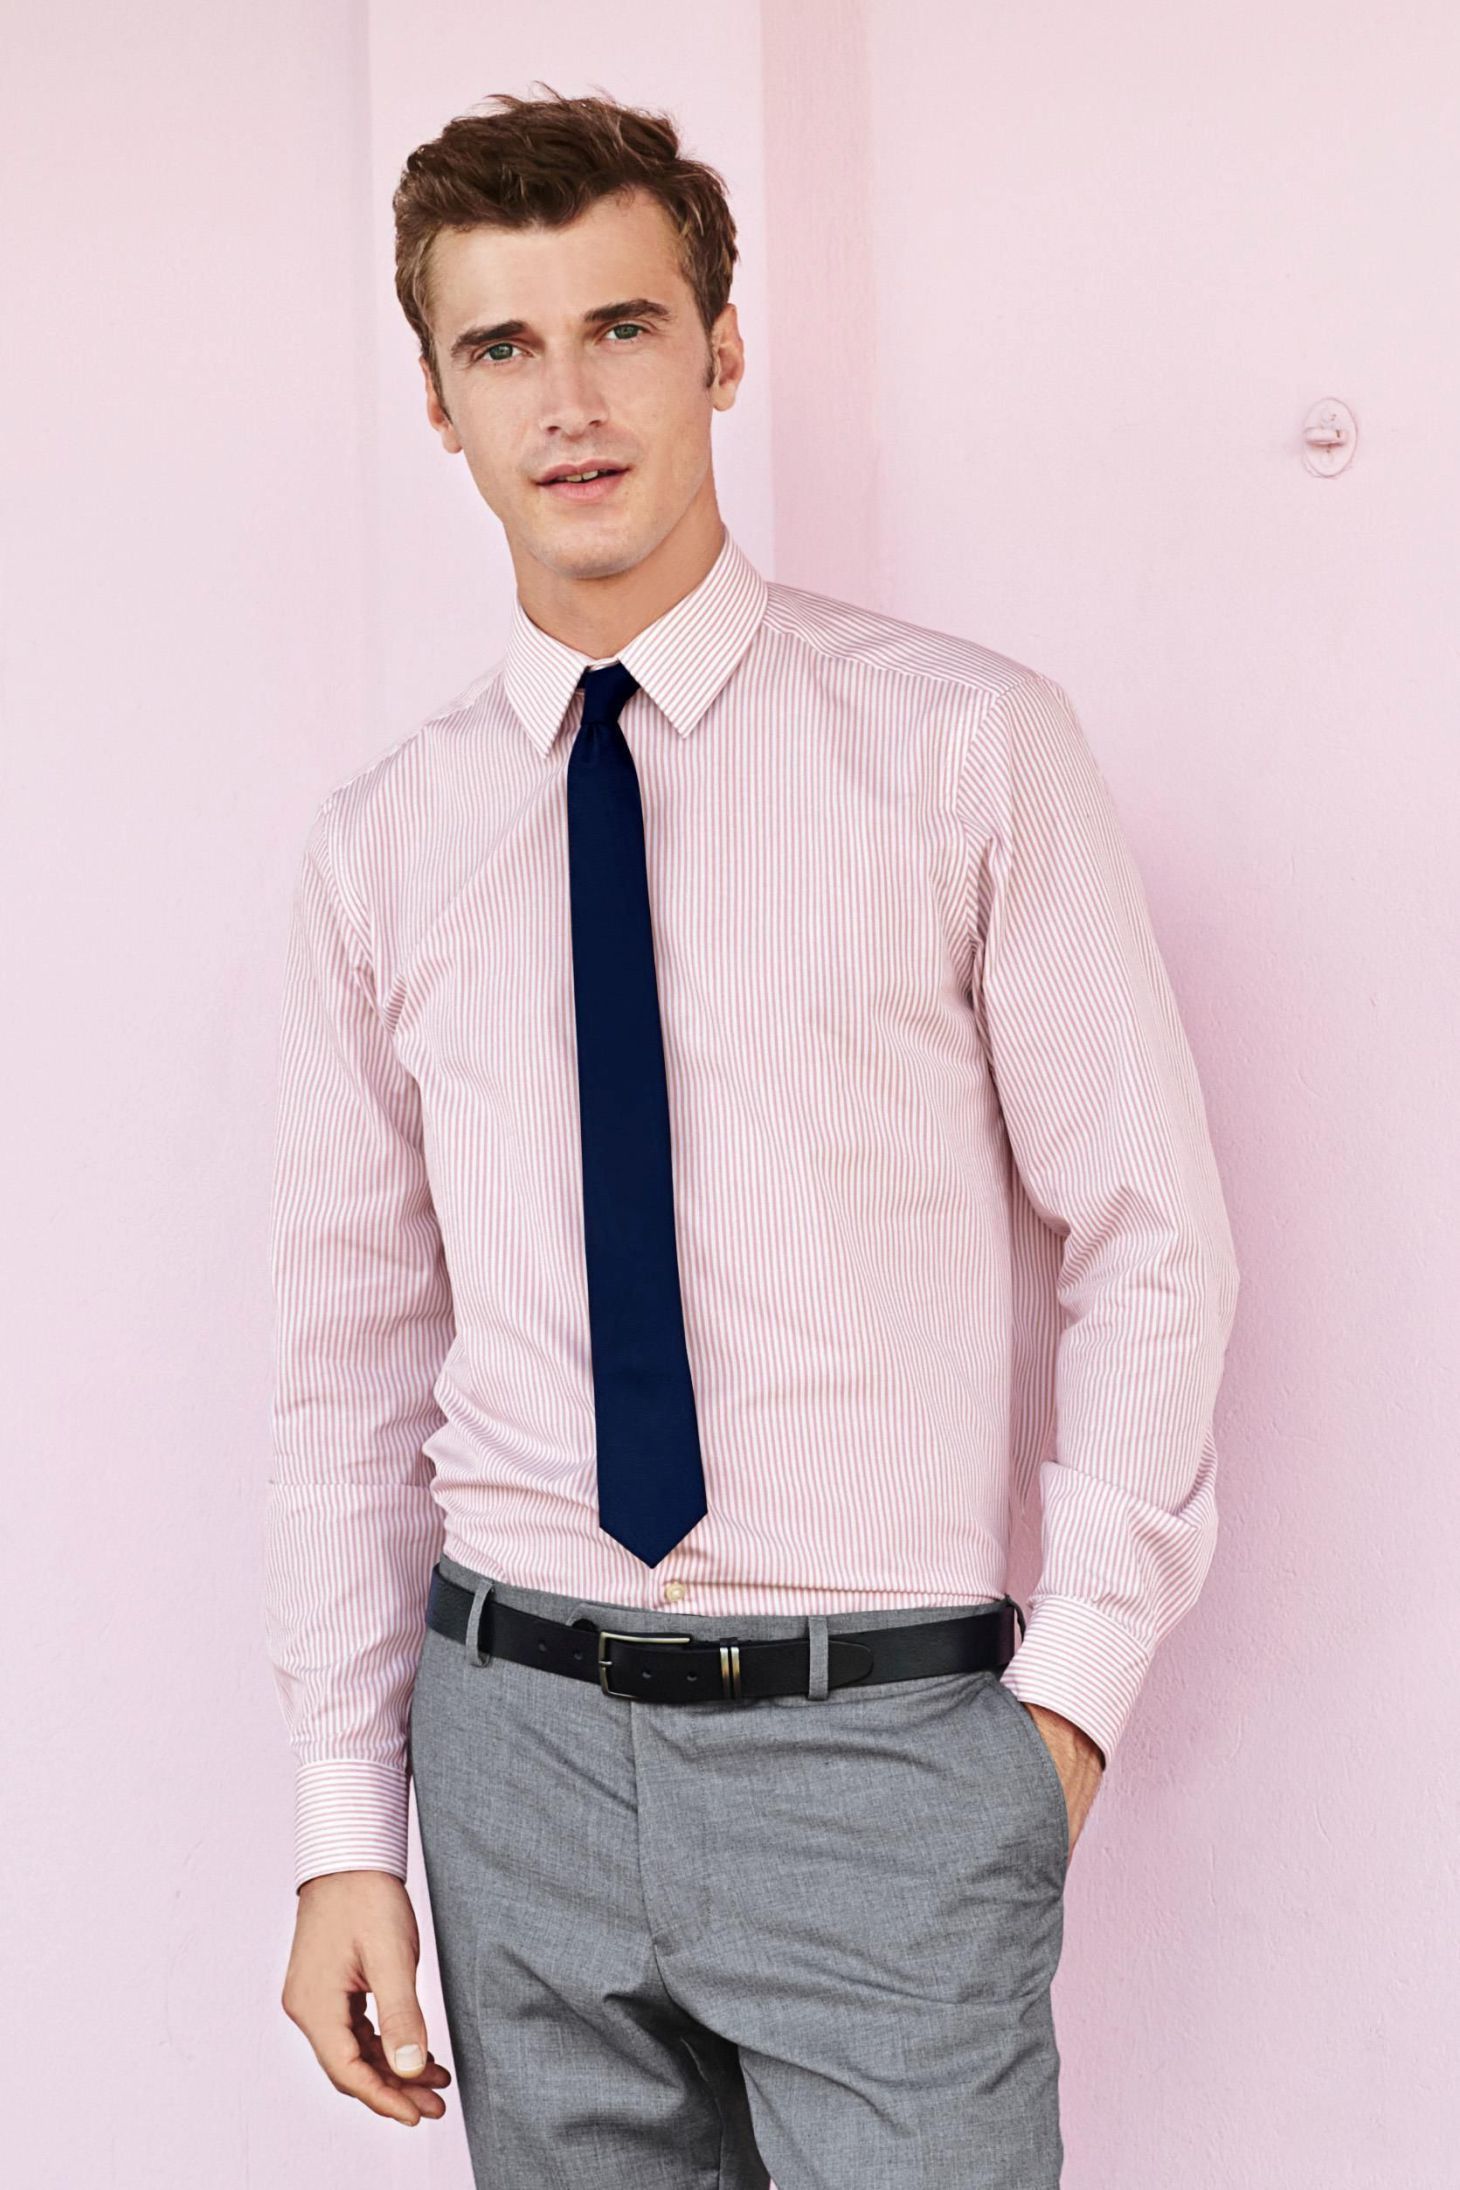 pink dress shirt with tie